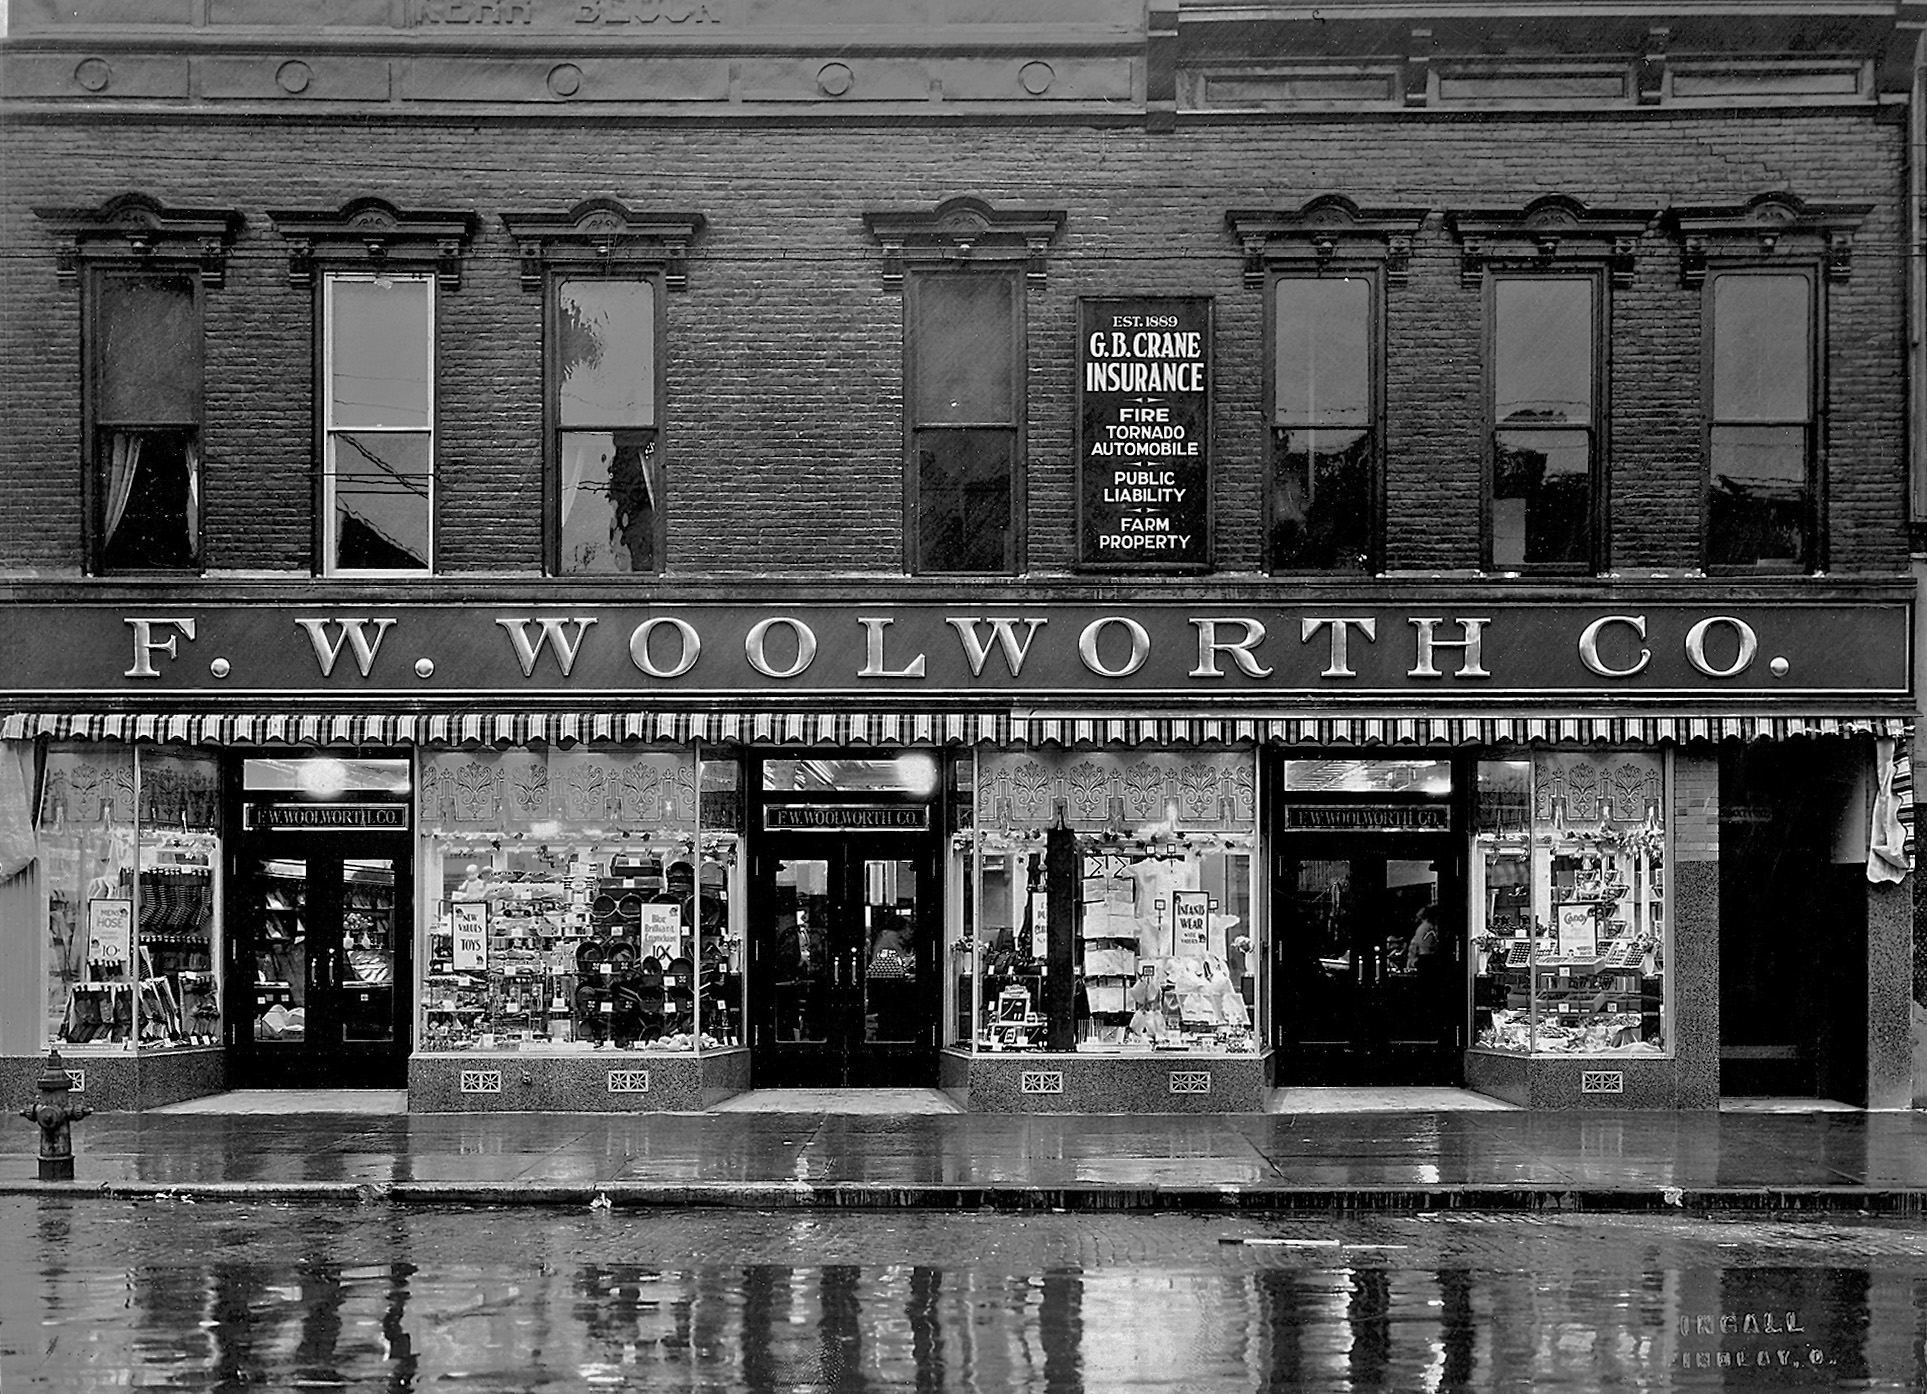 My uncle managed a series of Woolworth stores during the 1920's and 30's.  He would have professional pictures taken of his store displays.  This is his store in Findlay Ohio, sometime in the late 1920's. View full size.